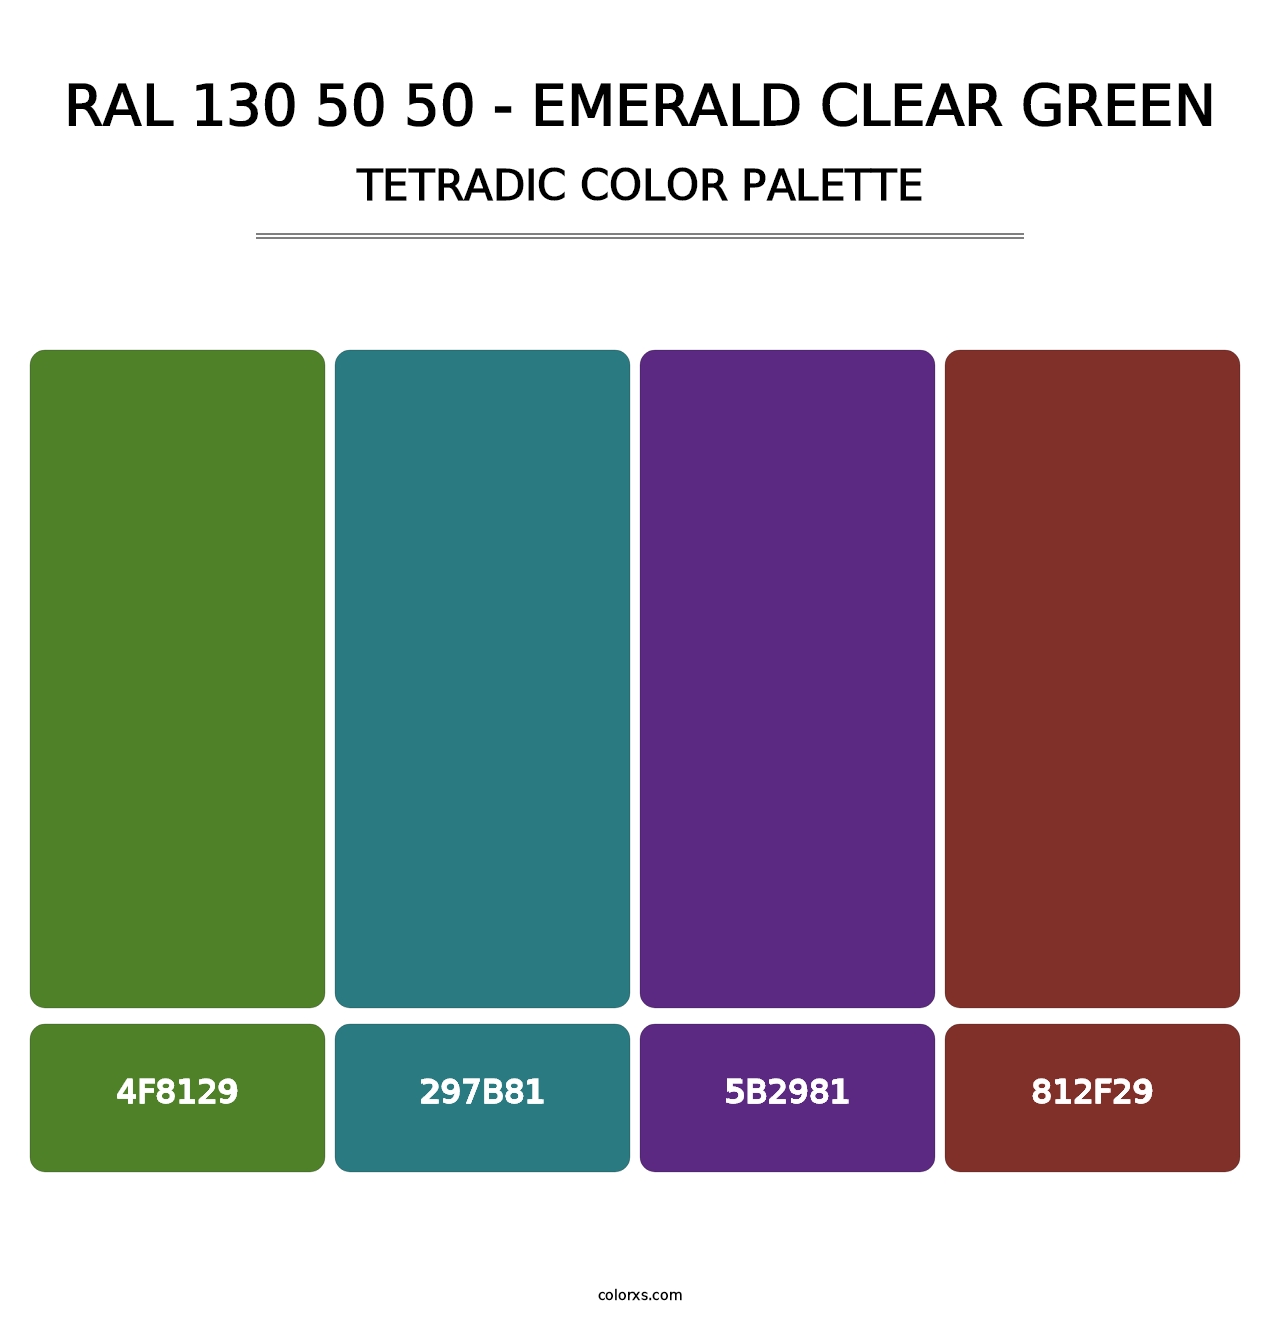 RAL 130 50 50 - Emerald Clear Green - Tetradic Color Palette